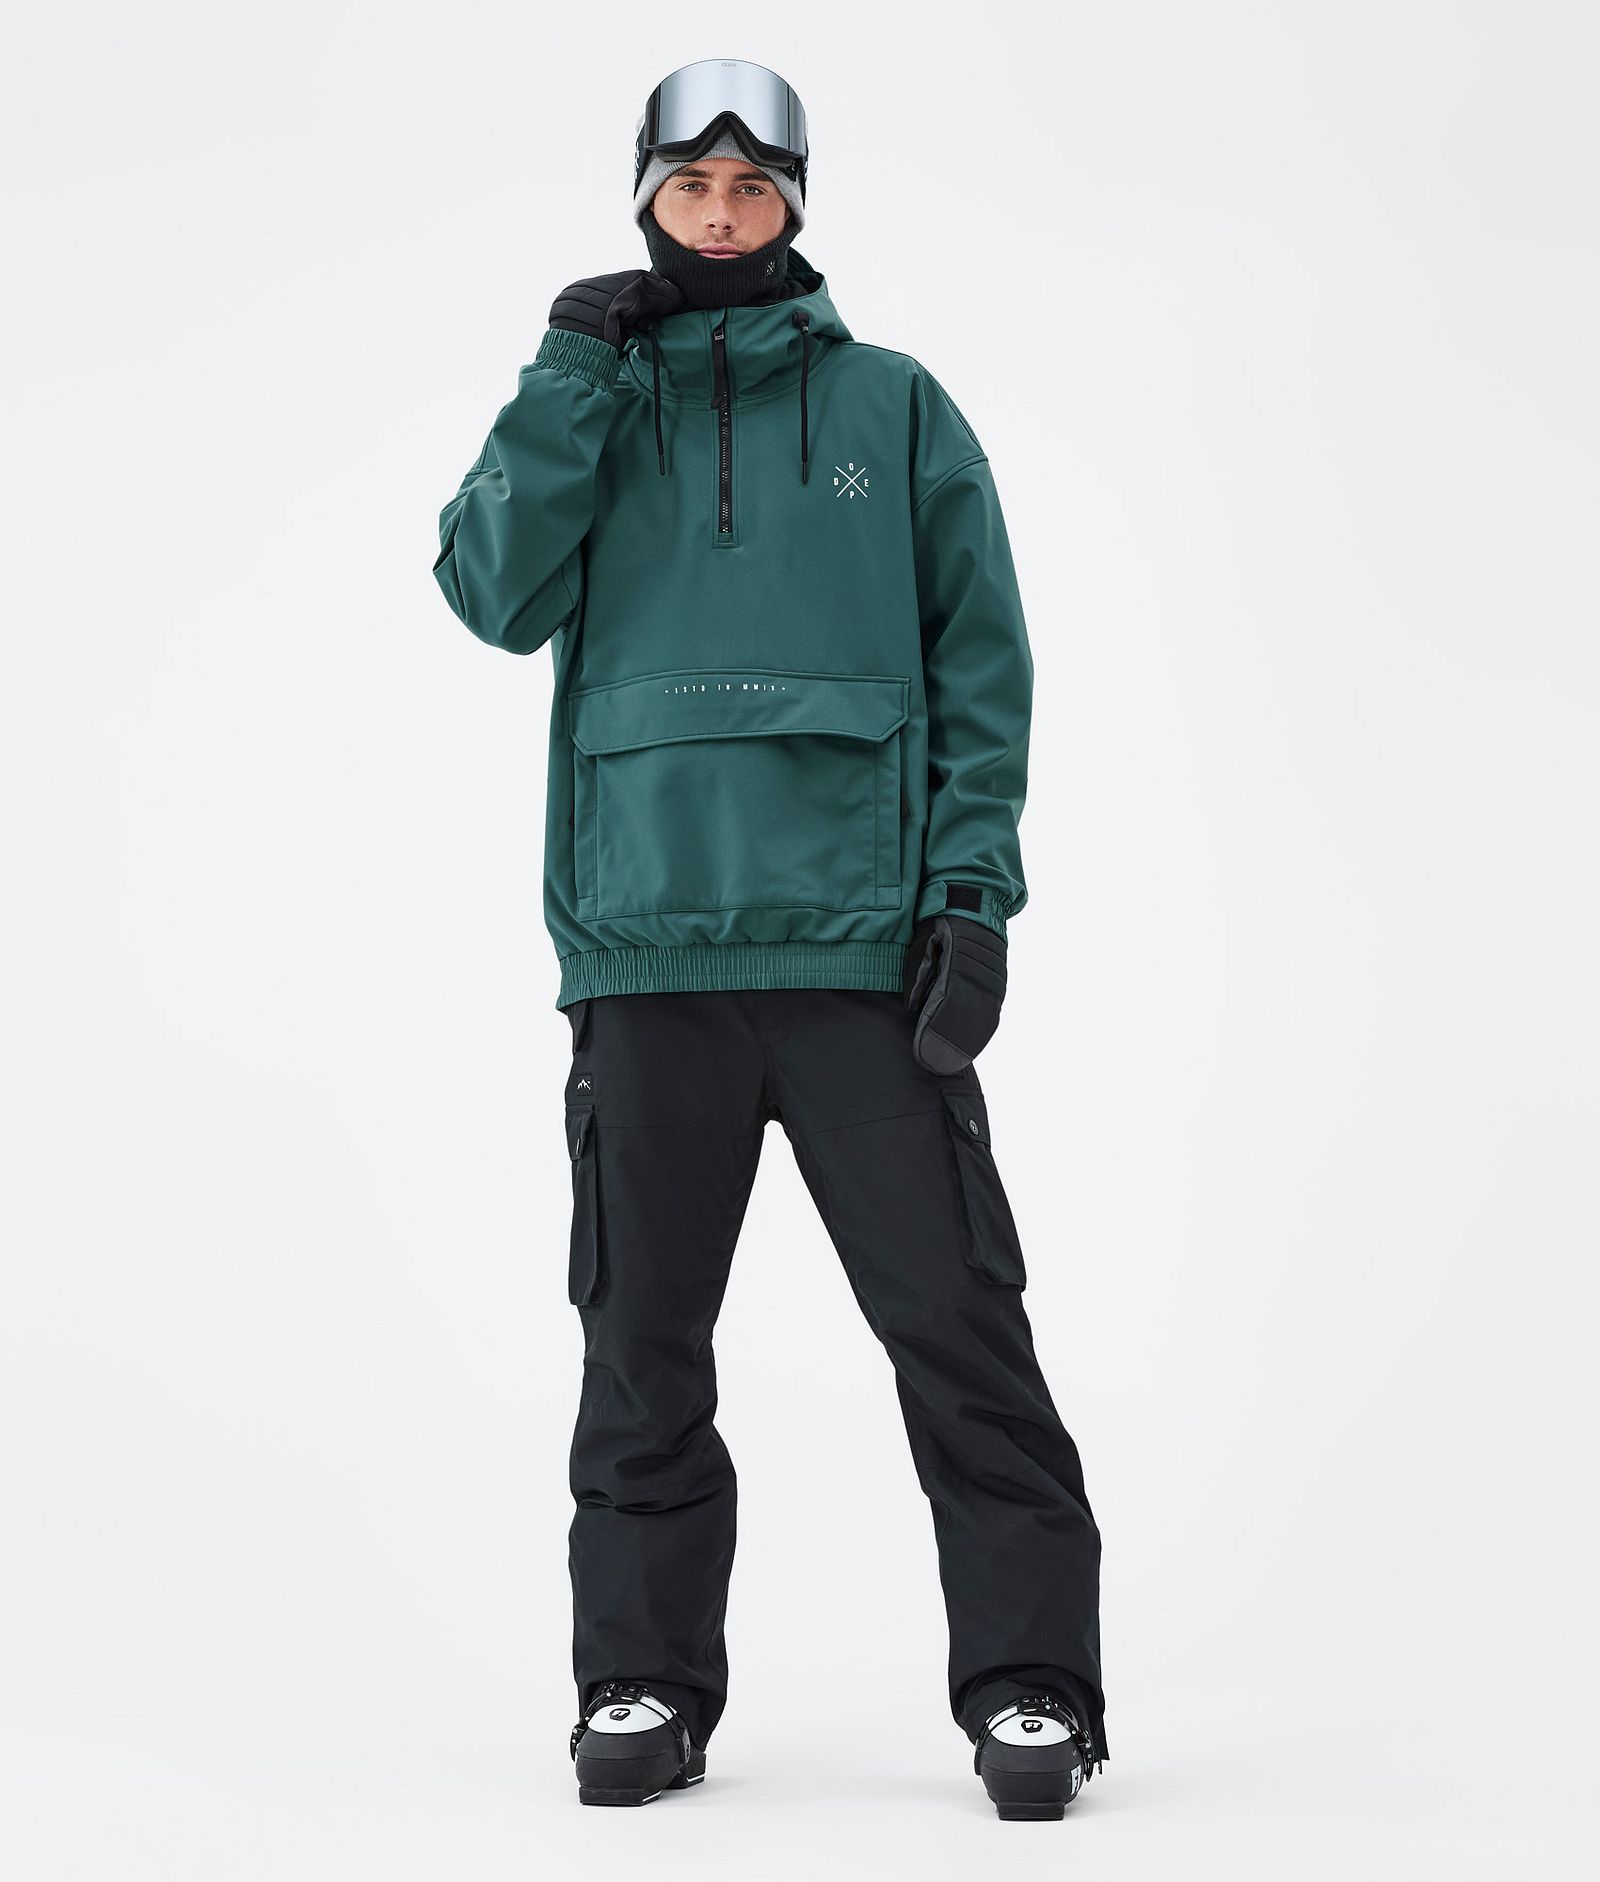 Dope Cyclone Outfit Sci Uomo Bottle Green/Blackout